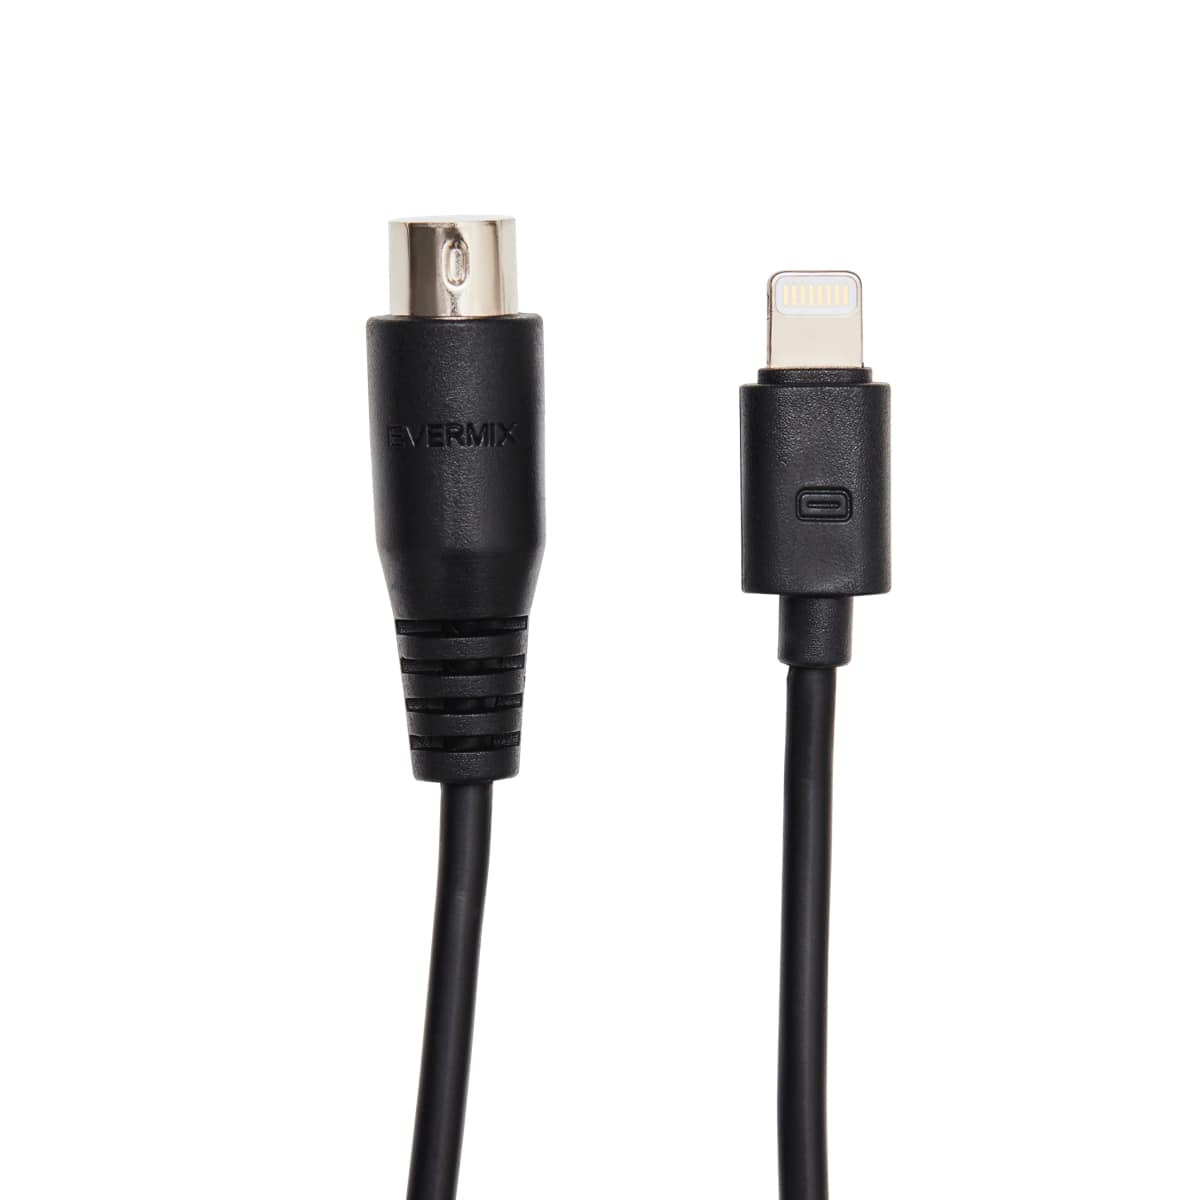 Evermix Replacement / Spare Power Cable (Lightning / iOS Version)